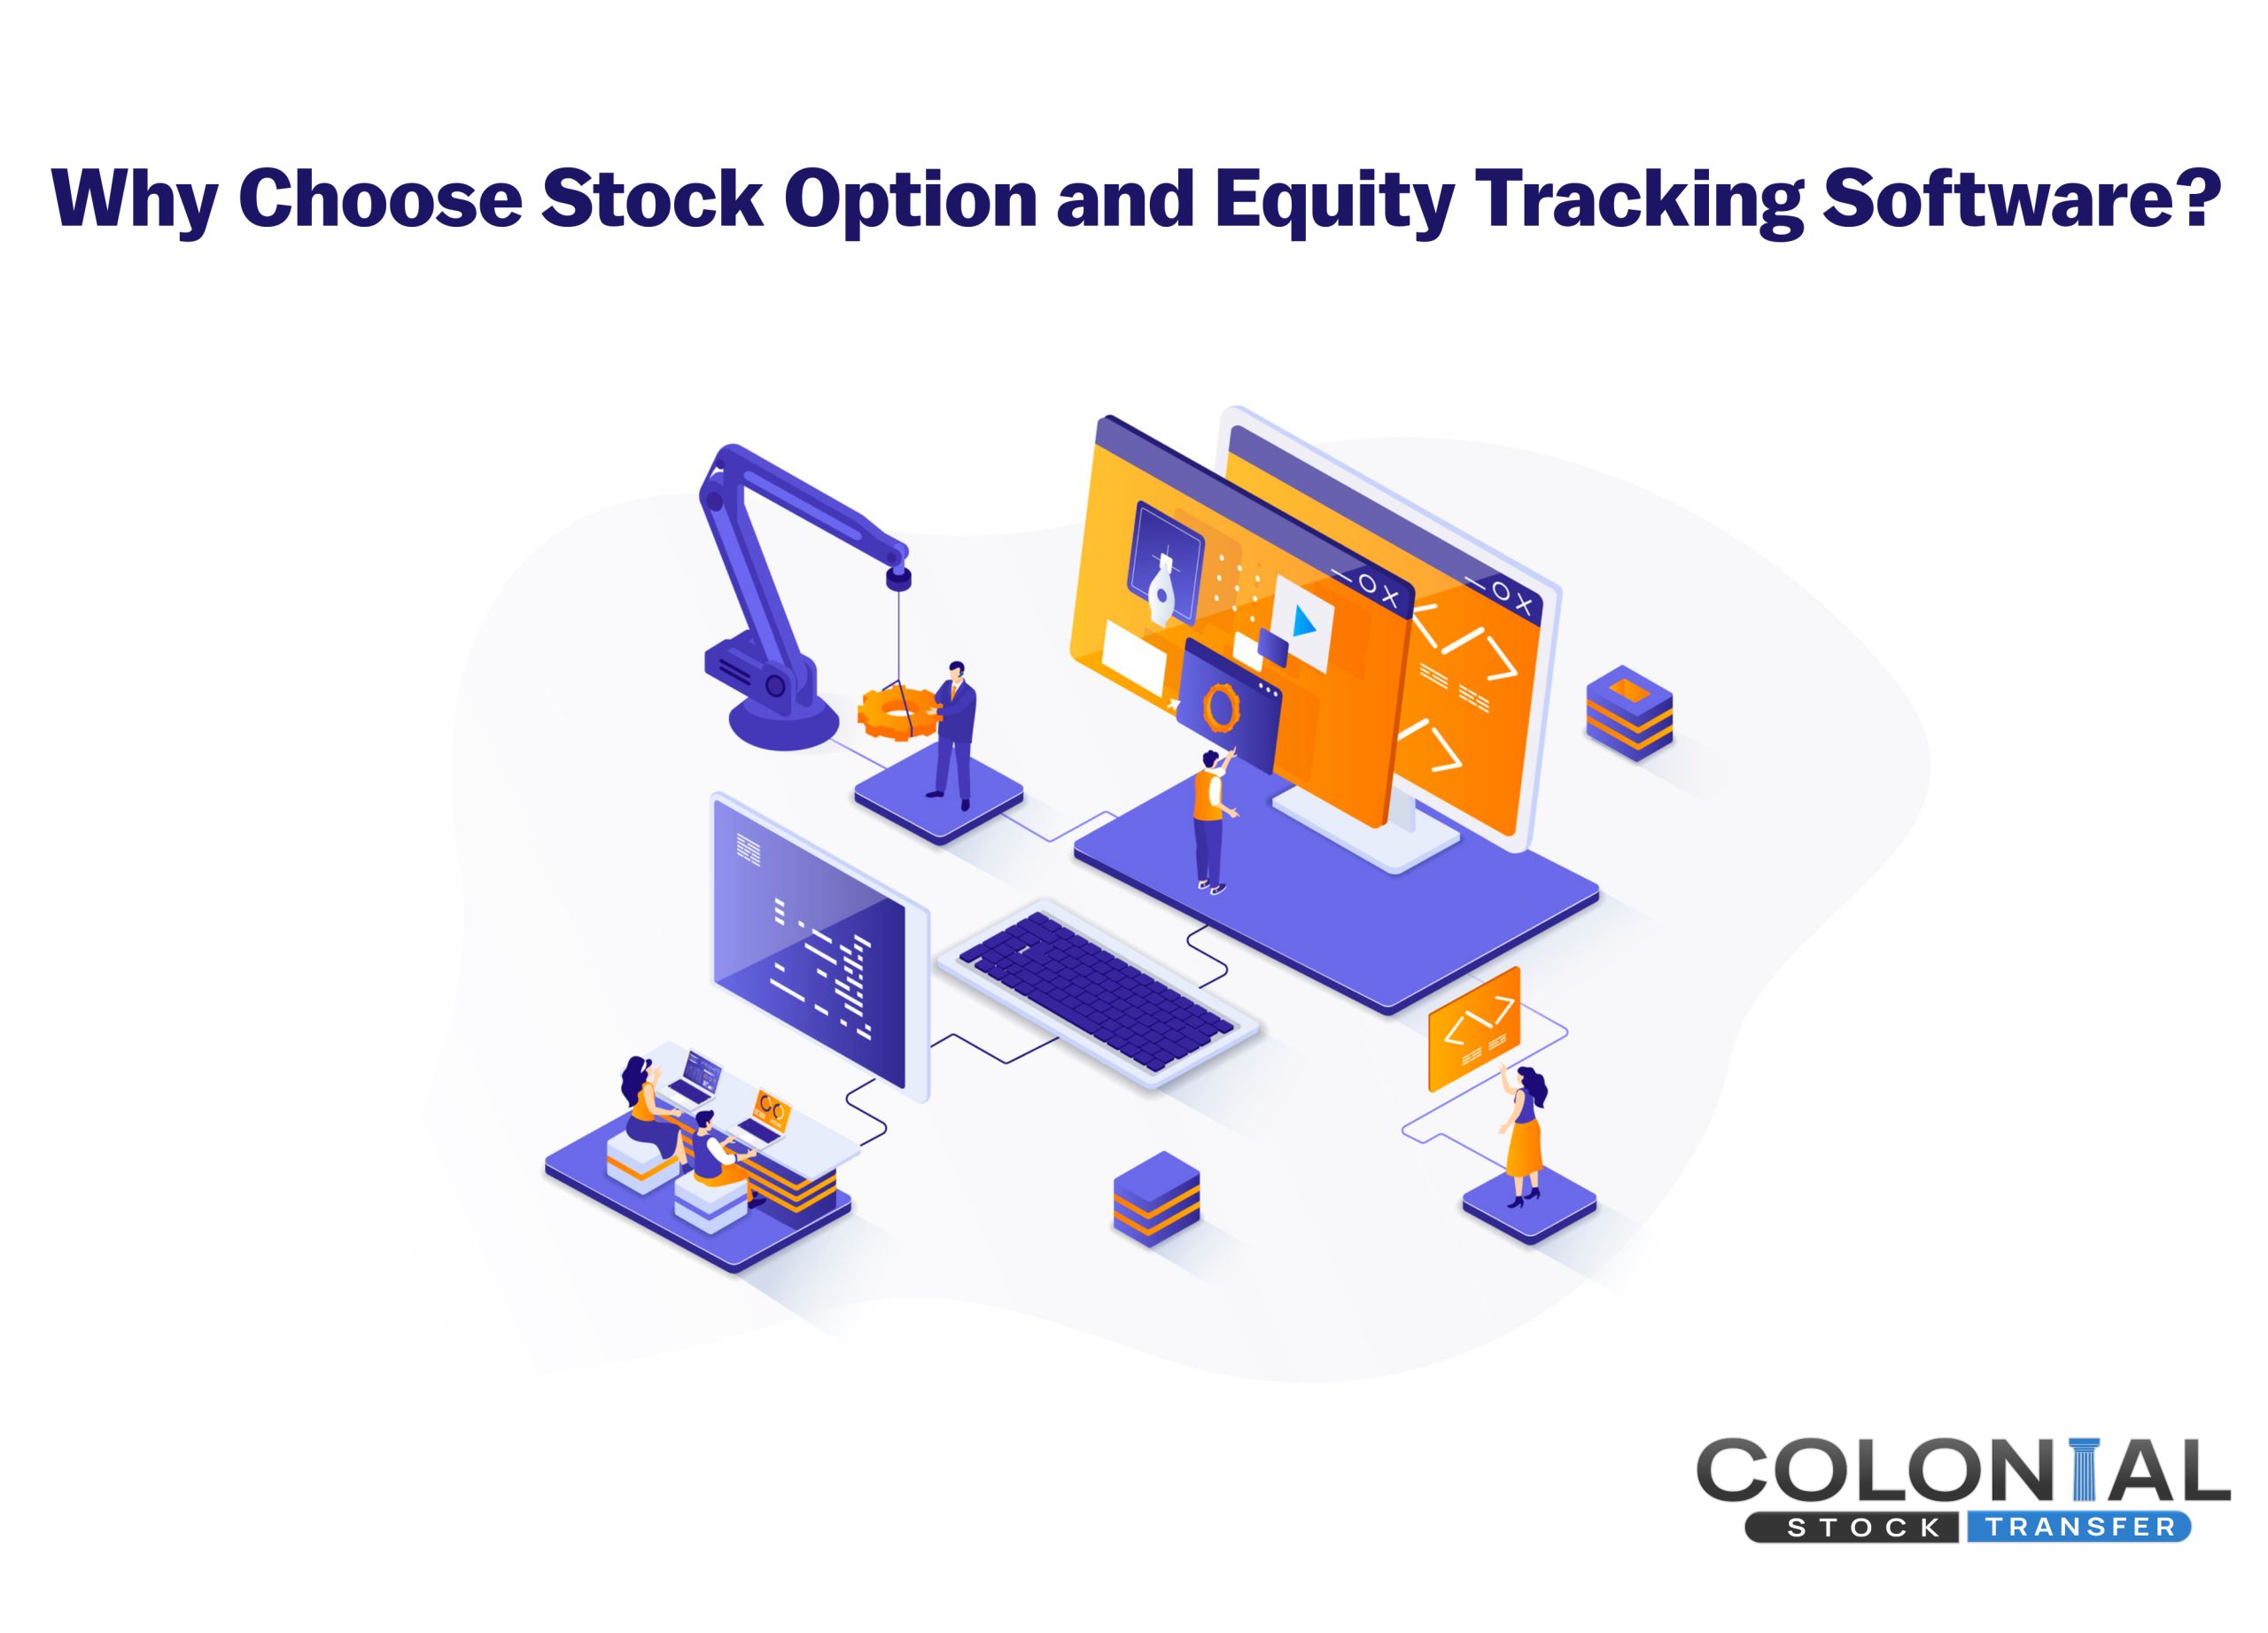 Why Choose Stock Option and Equity Tracking Software?